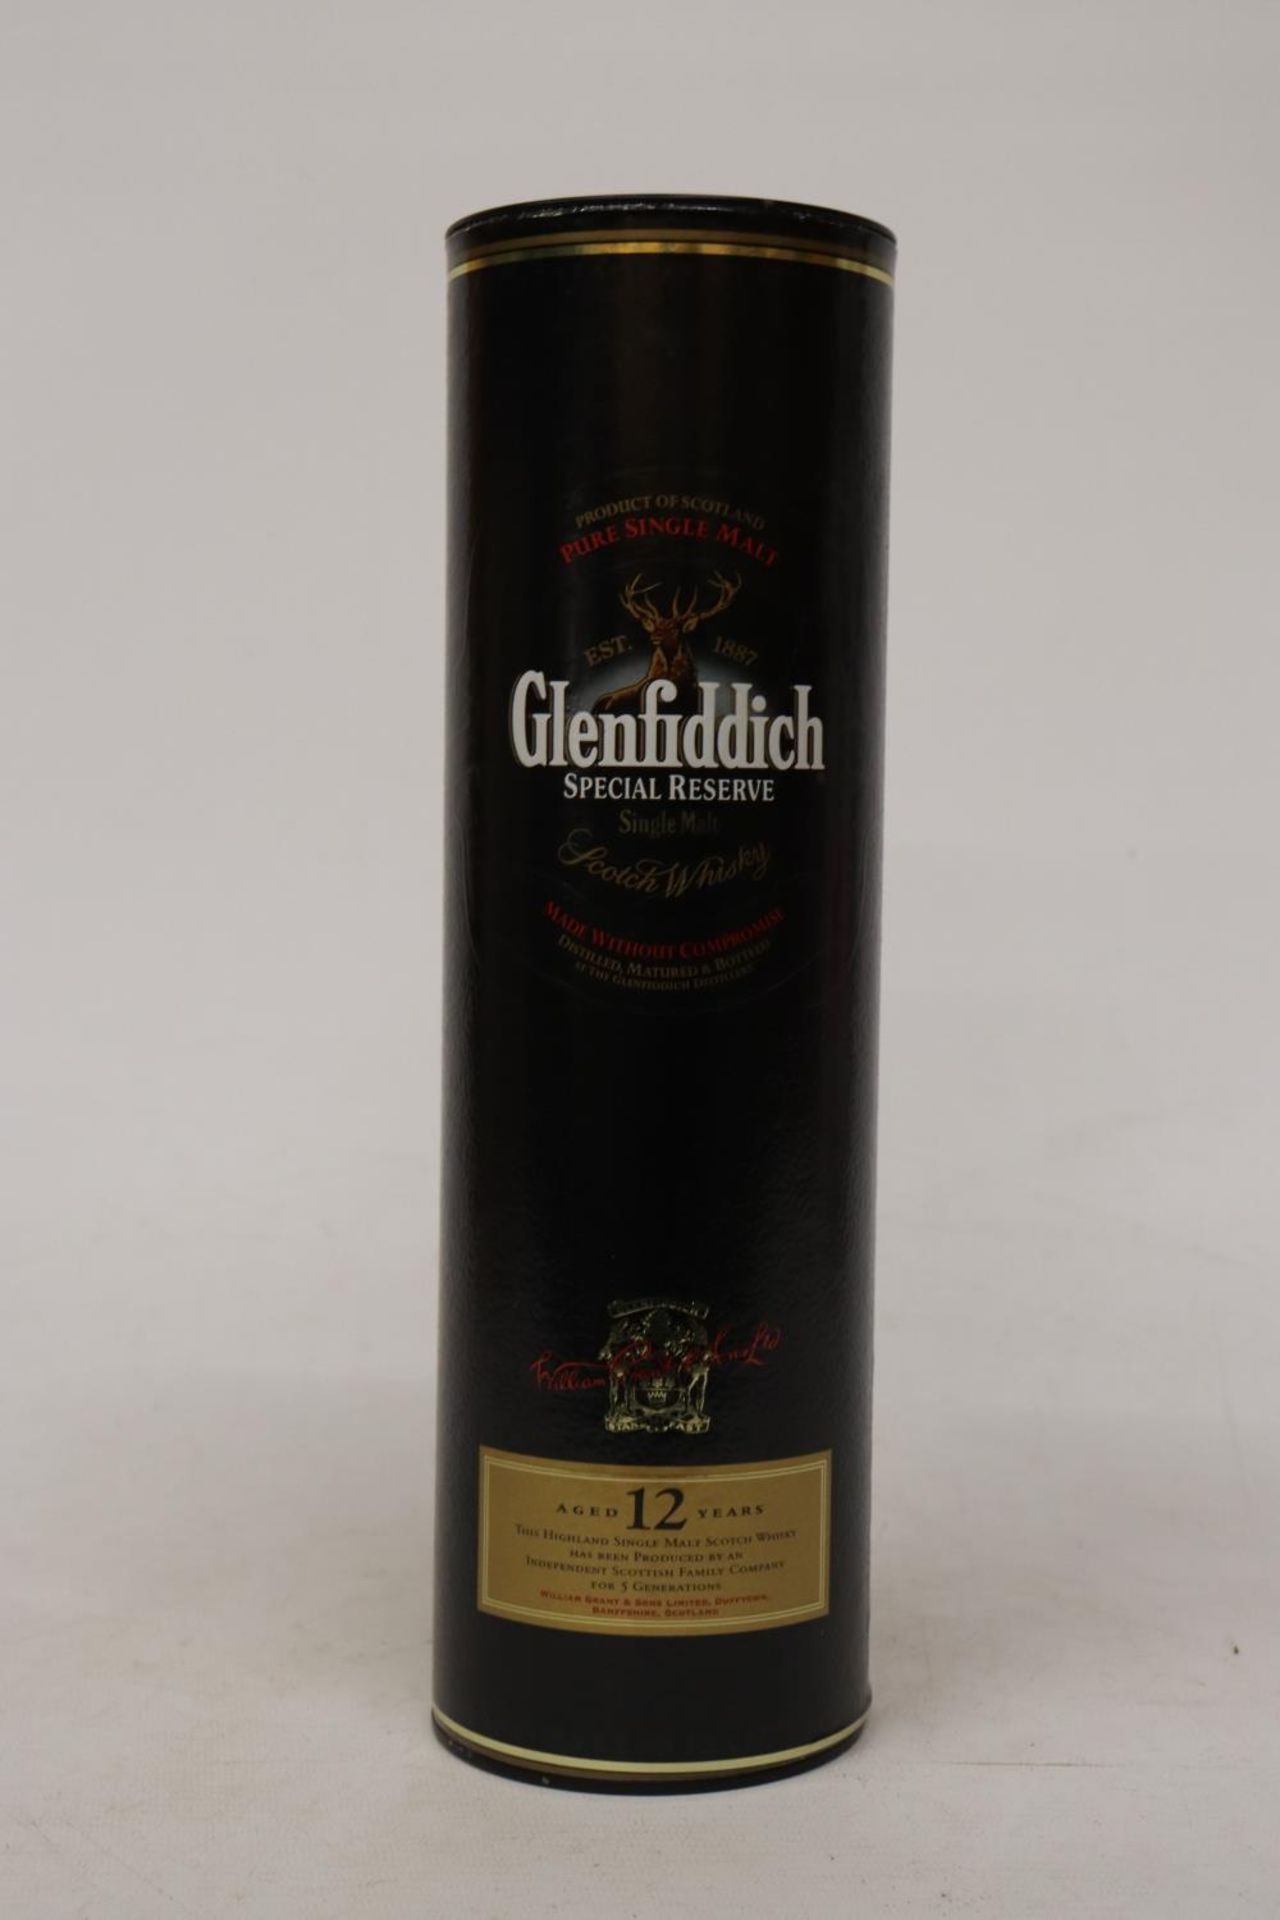 A BOTTLE OF GLENFIDDICH SPECIAL RESERVE 12 YEAR OLD MALT WHISKY, BOXED - Image 4 of 4